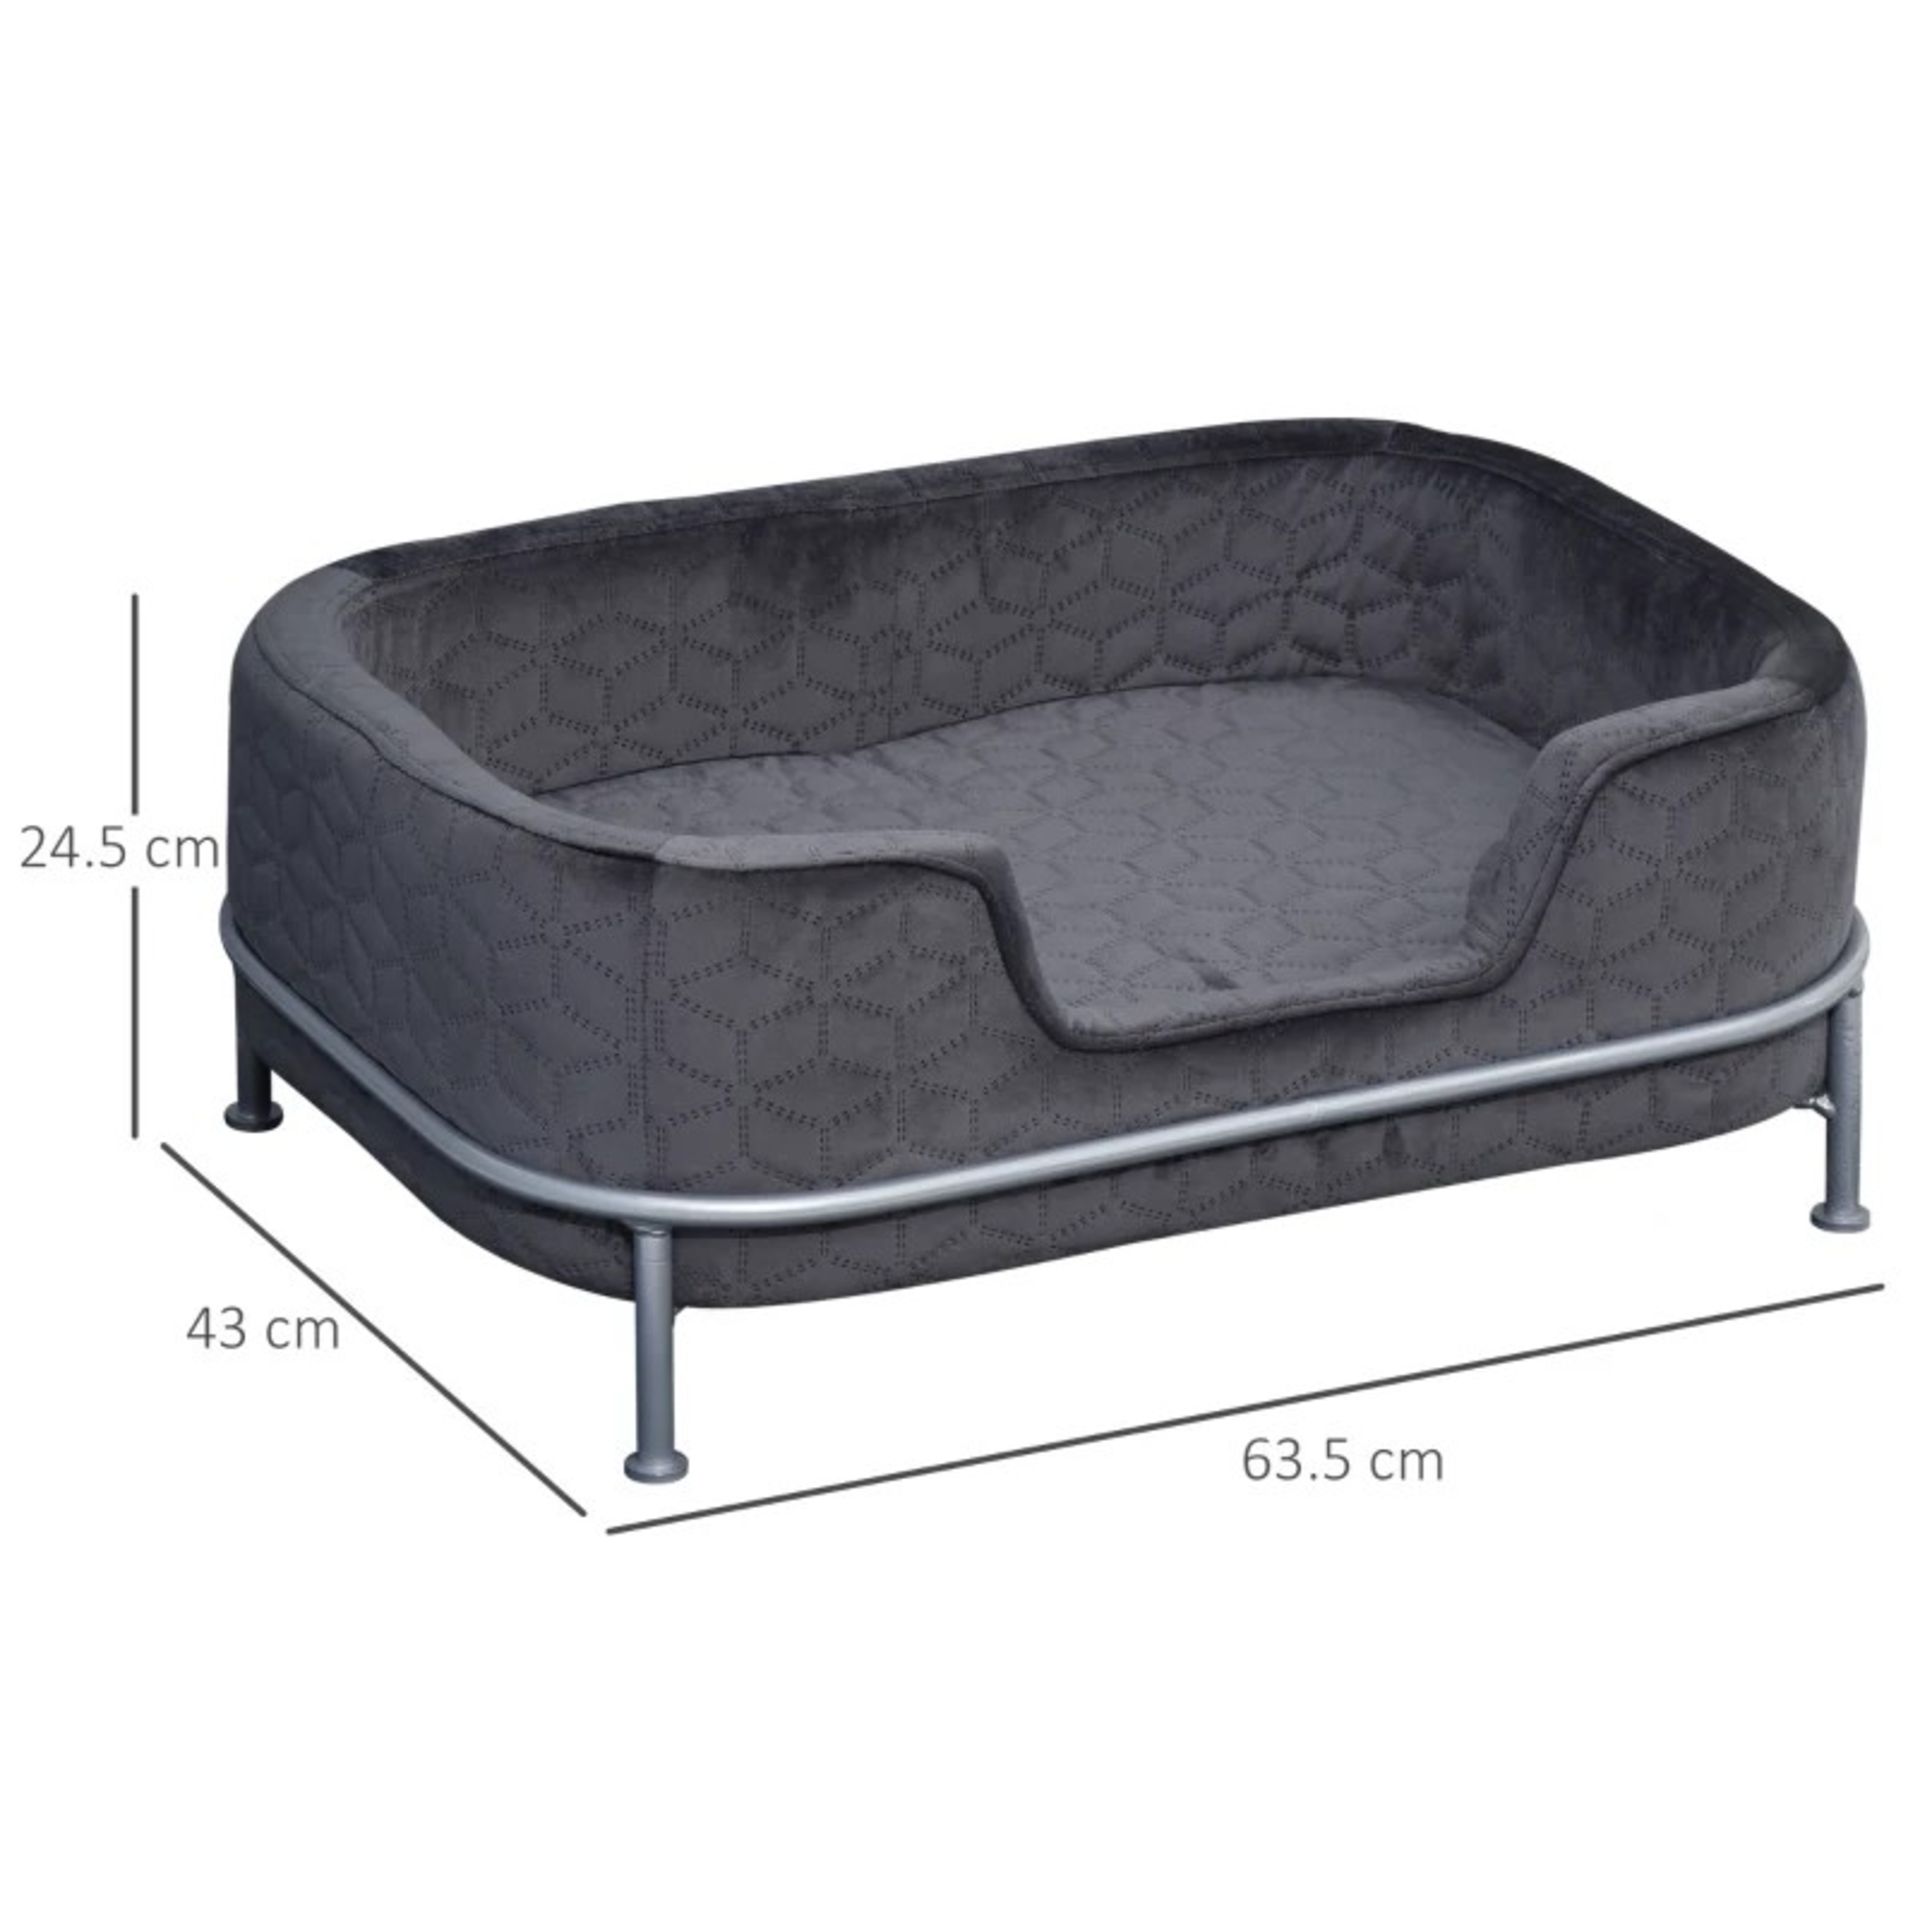 RRP £58.99 - Velvet Upholstered Elevated Small Pet Bed Grey - Image 2 of 4